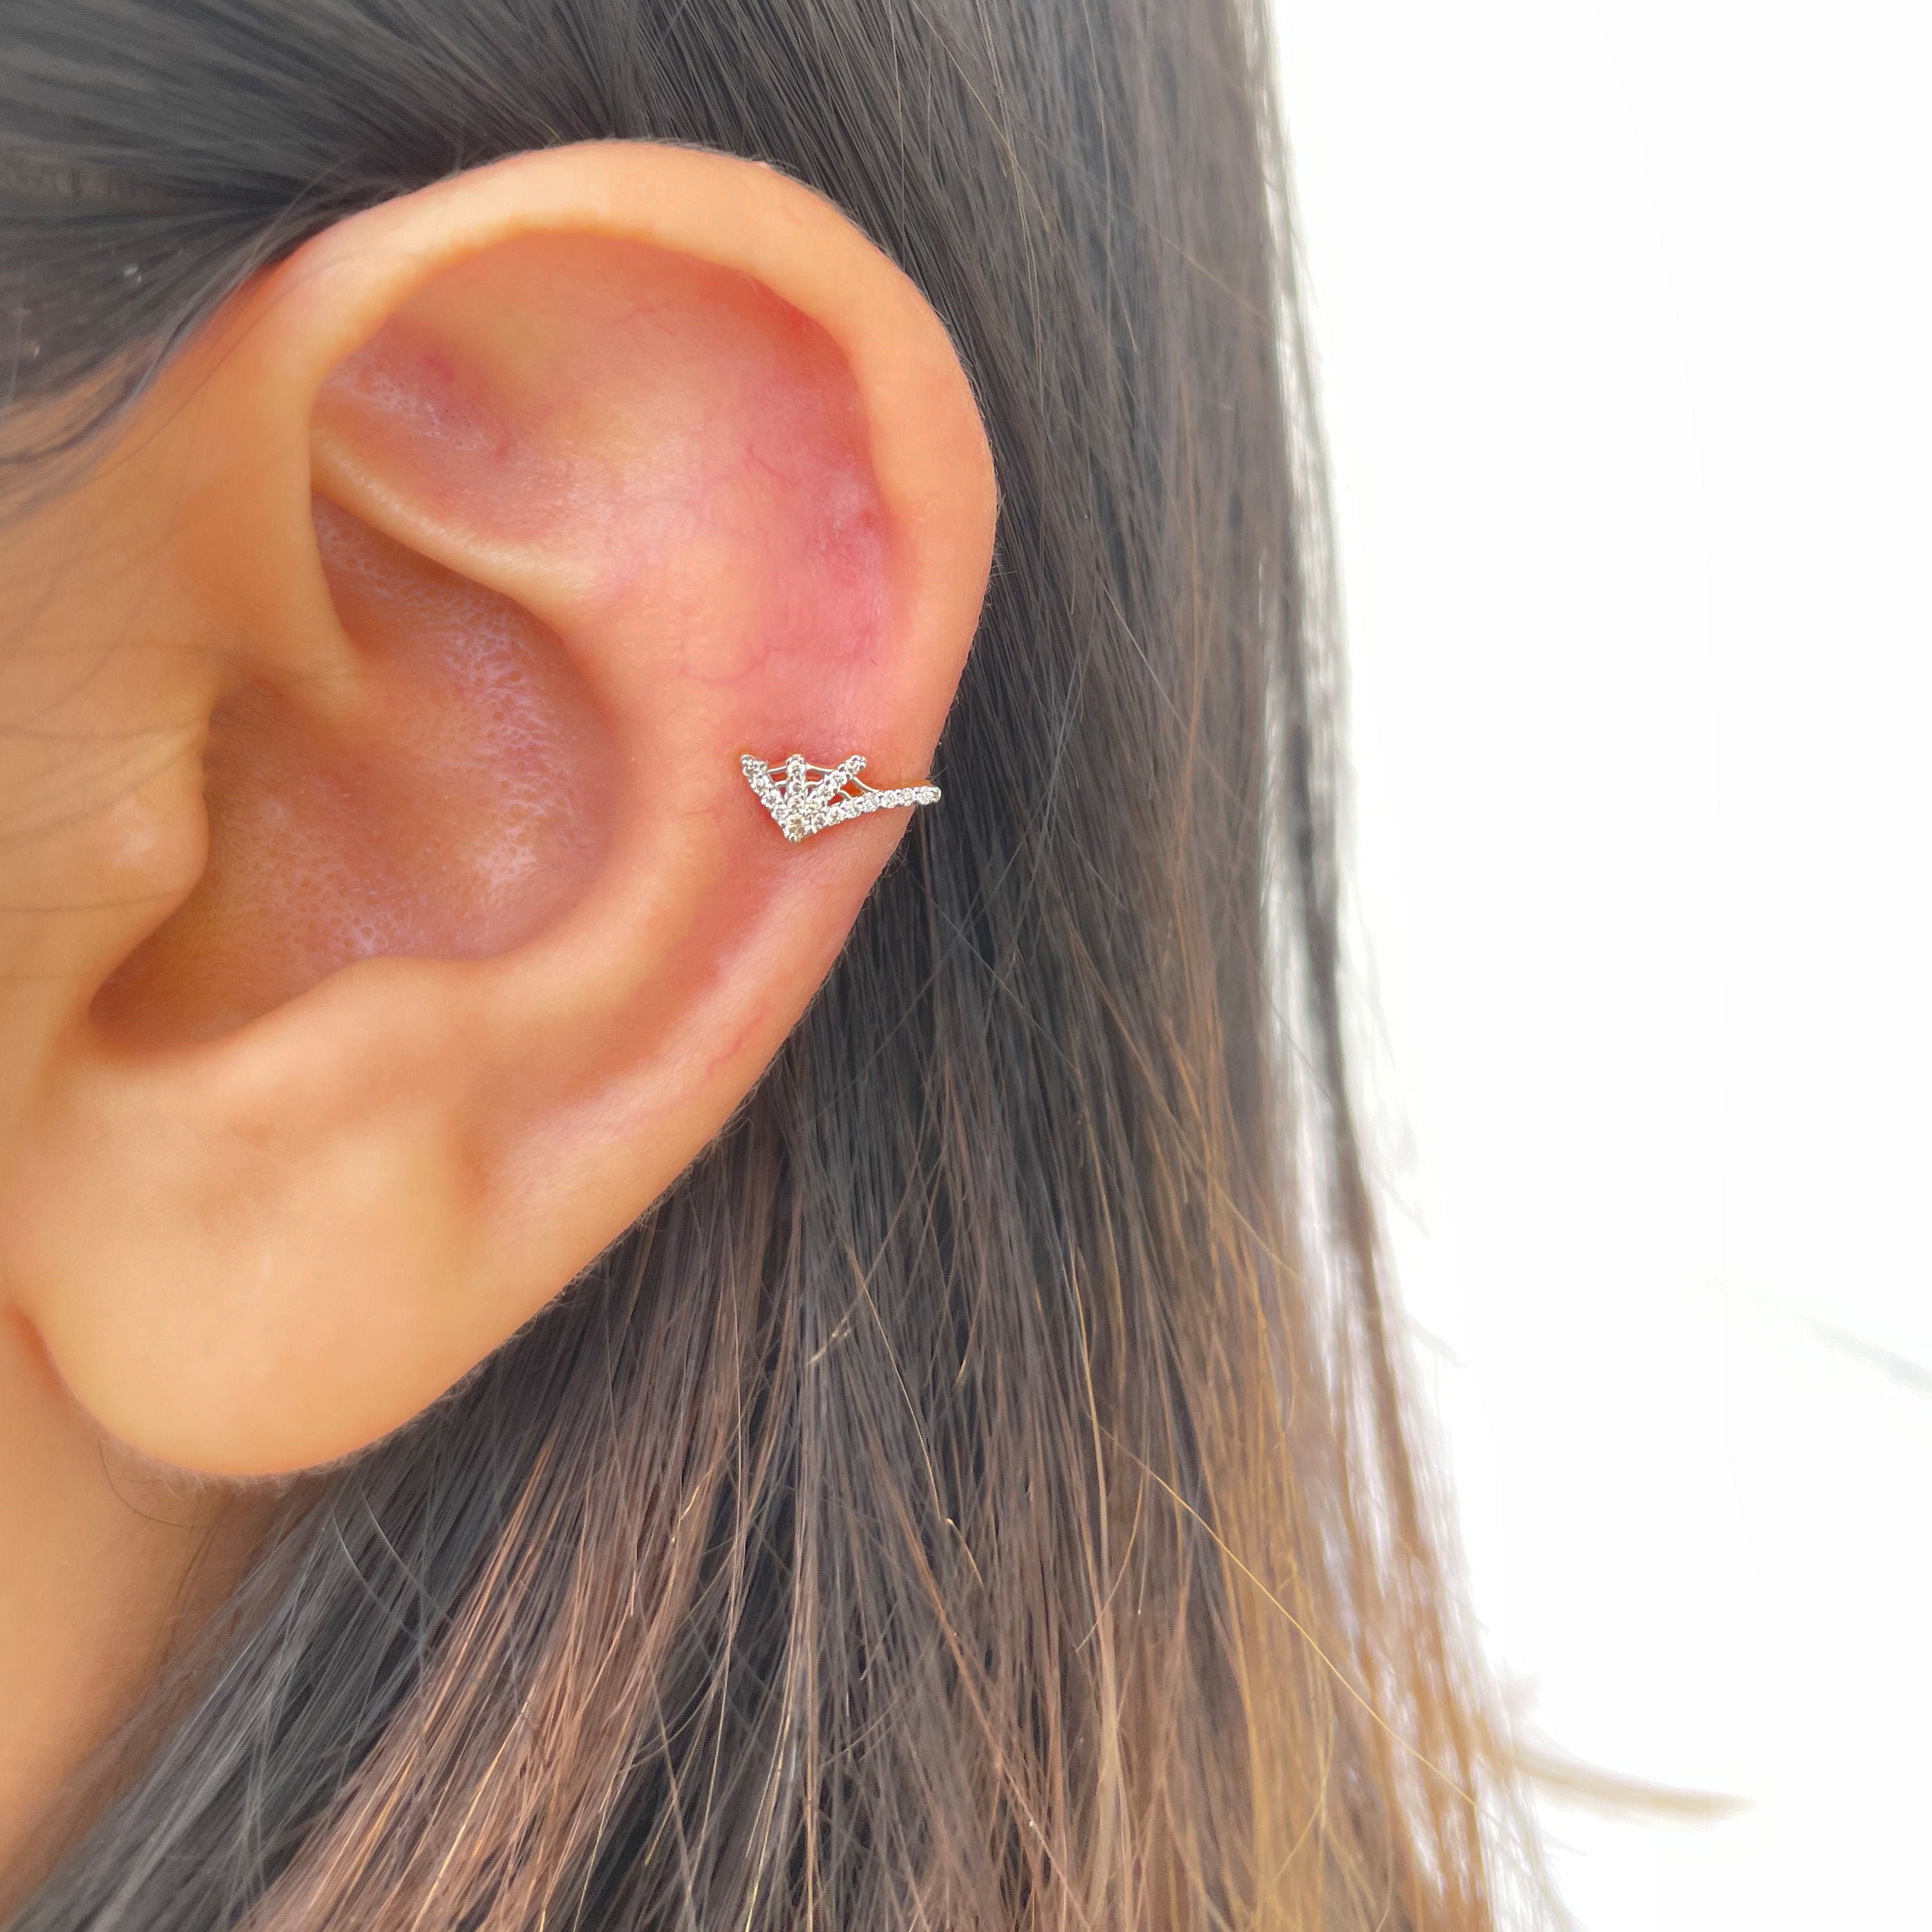 Dainty Diamond Earrings, Gold & Studs, Tragus Stud, Spider Web Earring, Conch Helix Rook Piercing